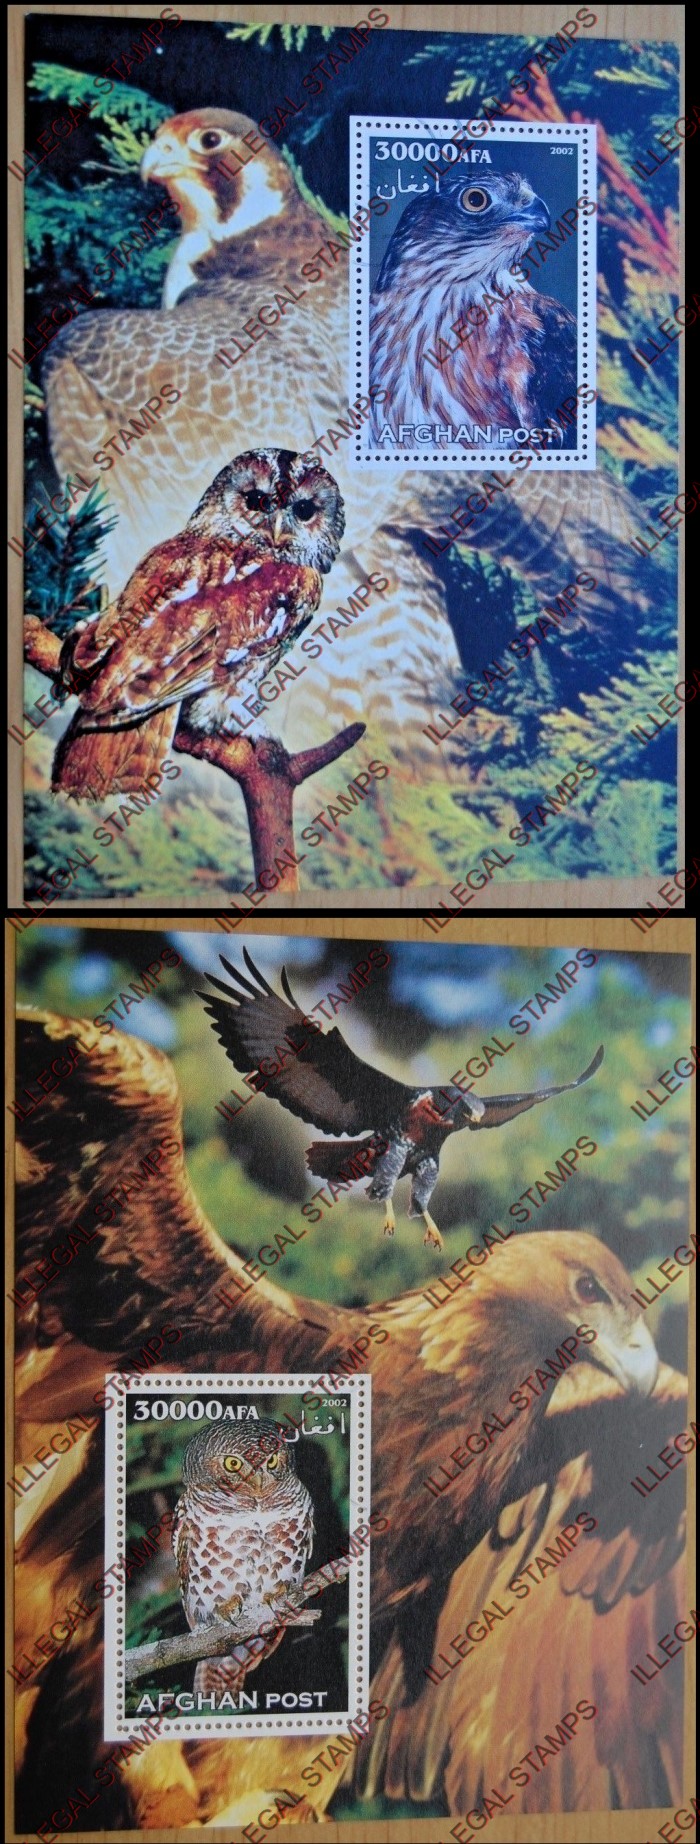 Afghanistan 2002 Eagles and Owls Illegal Stamp Souvenir Sheets of One